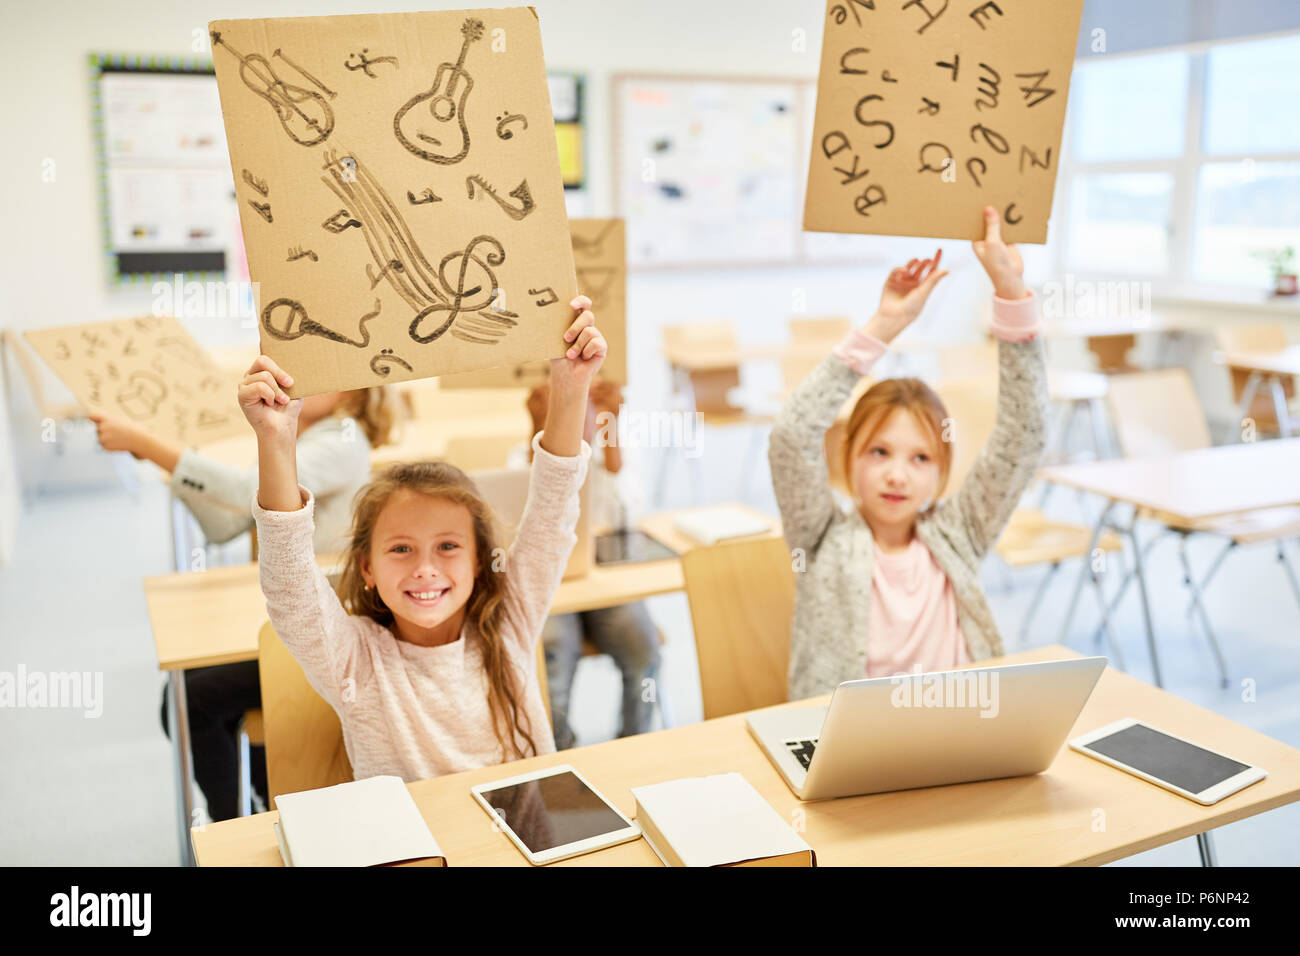 Girls in elementary school hold signs for creativity and music lessons Stock Photo